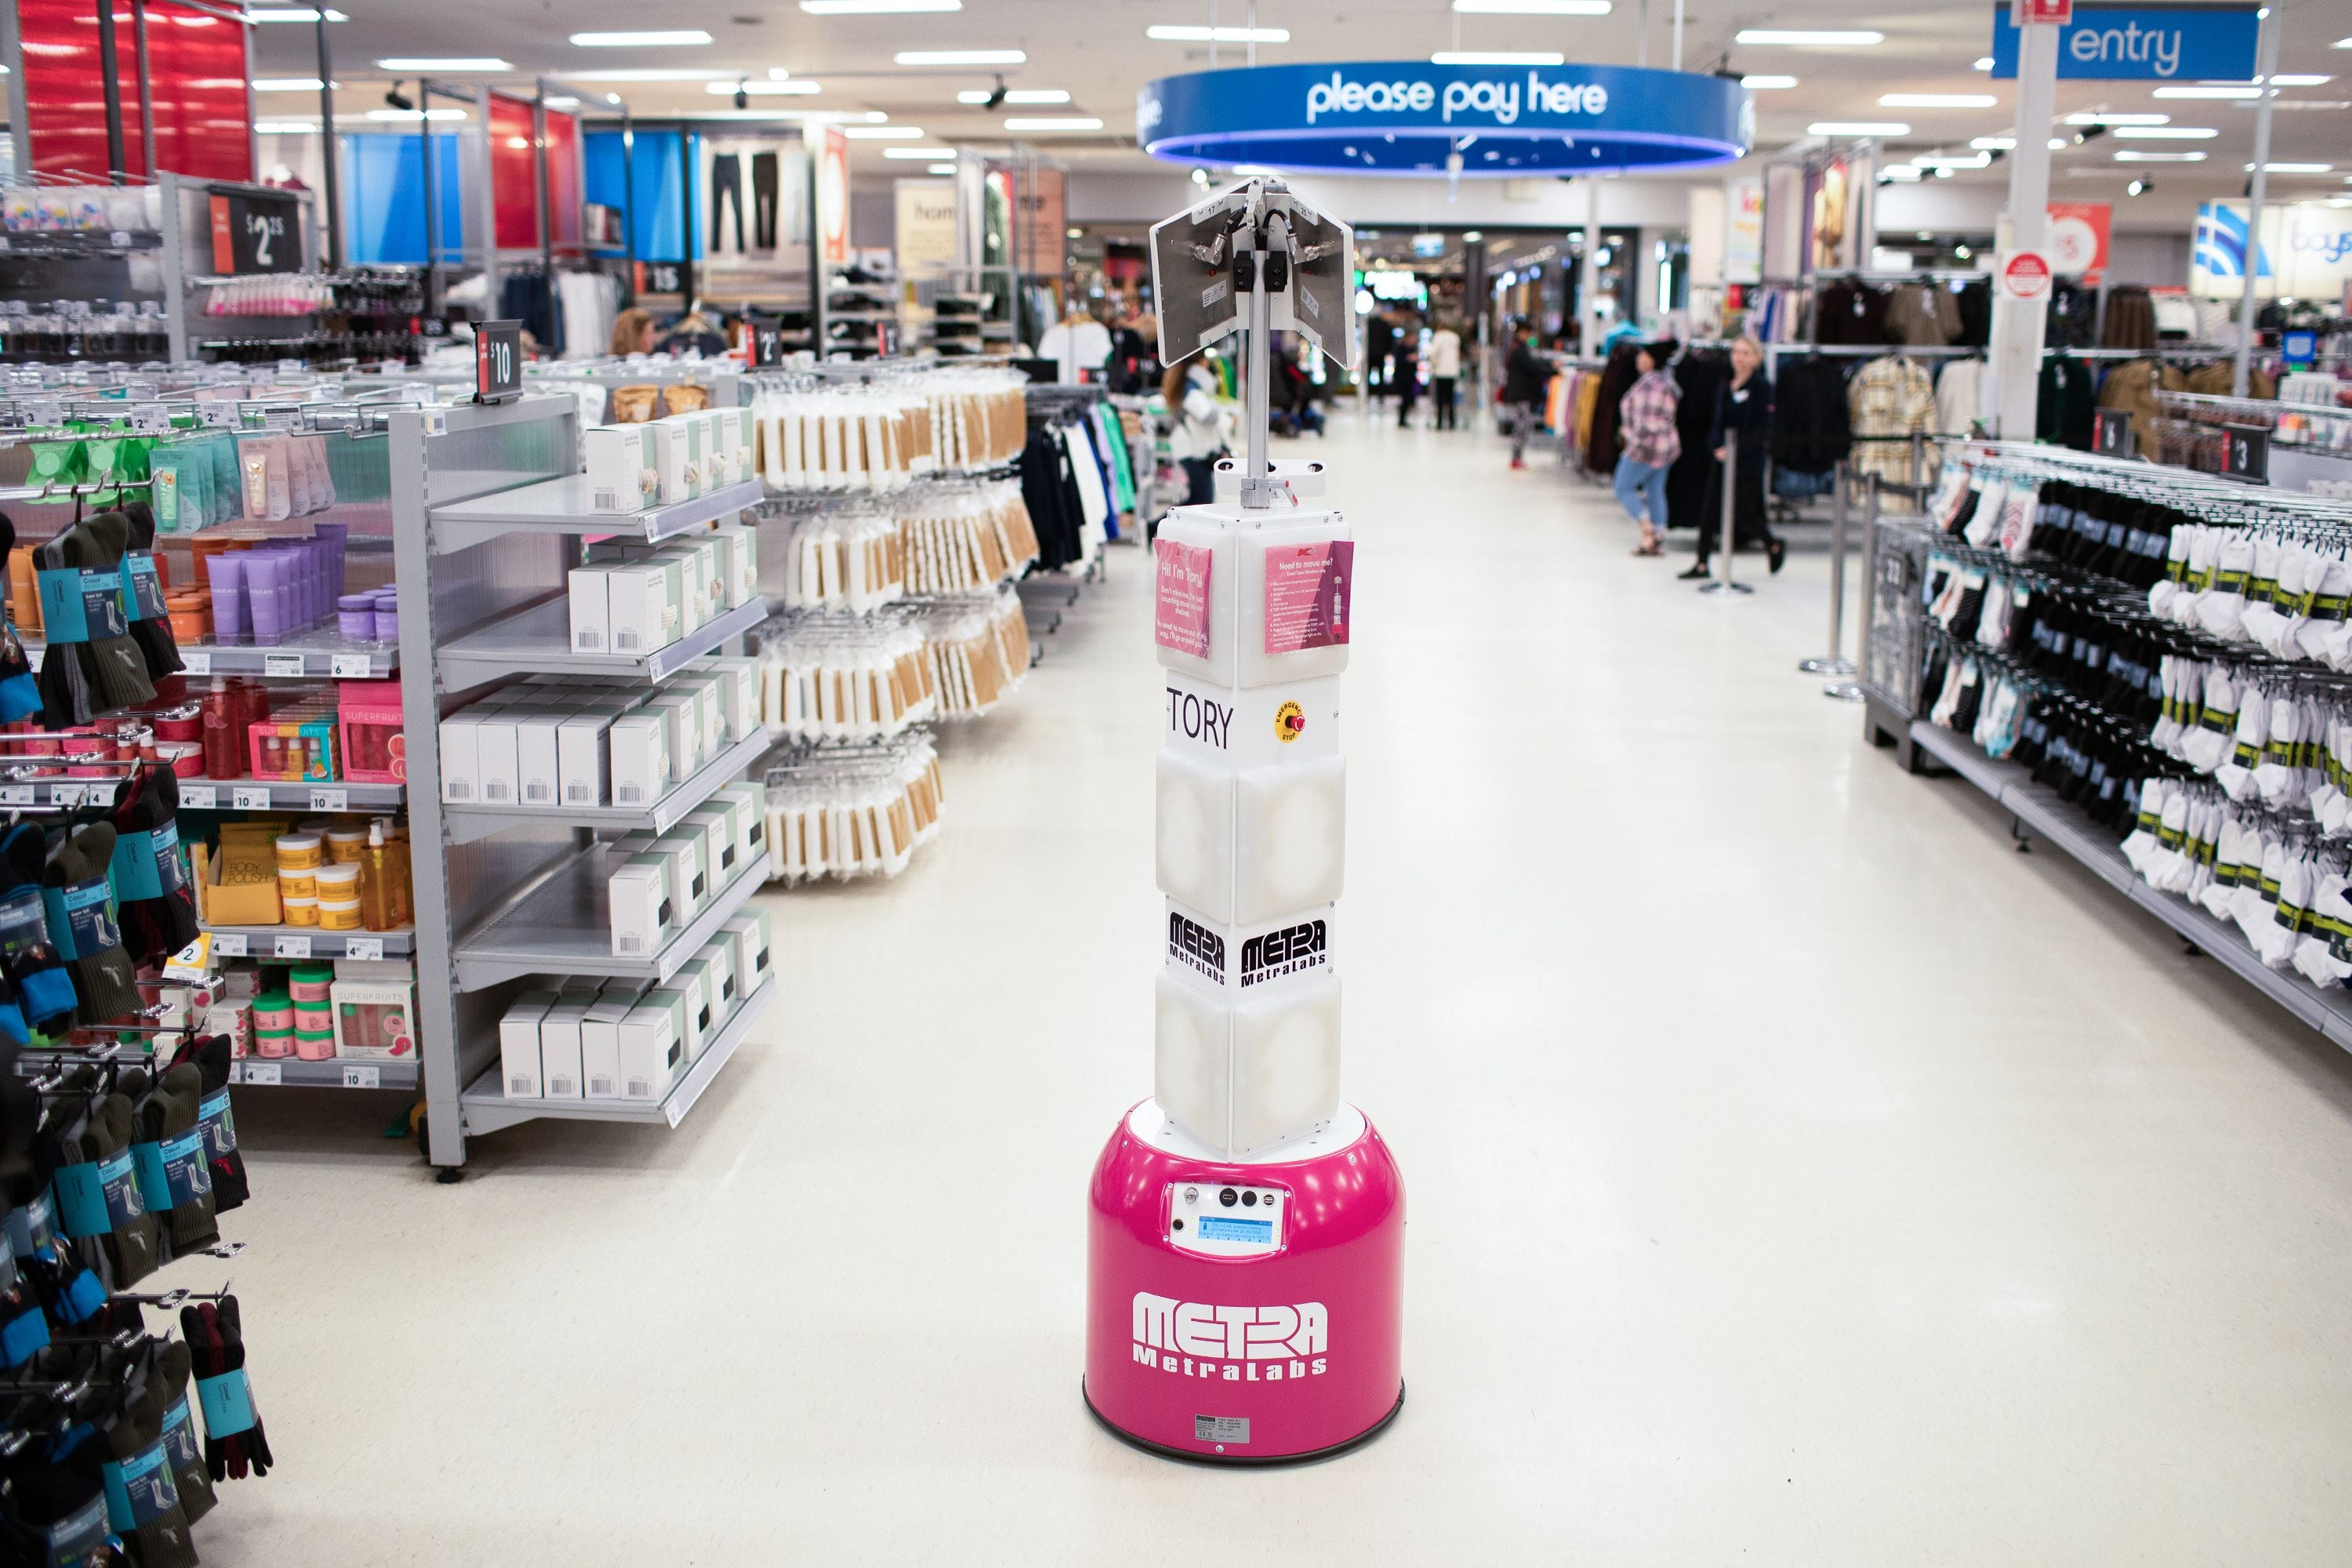 Kmart announced it would introduce inventory robots to all of its New Zealand stores.